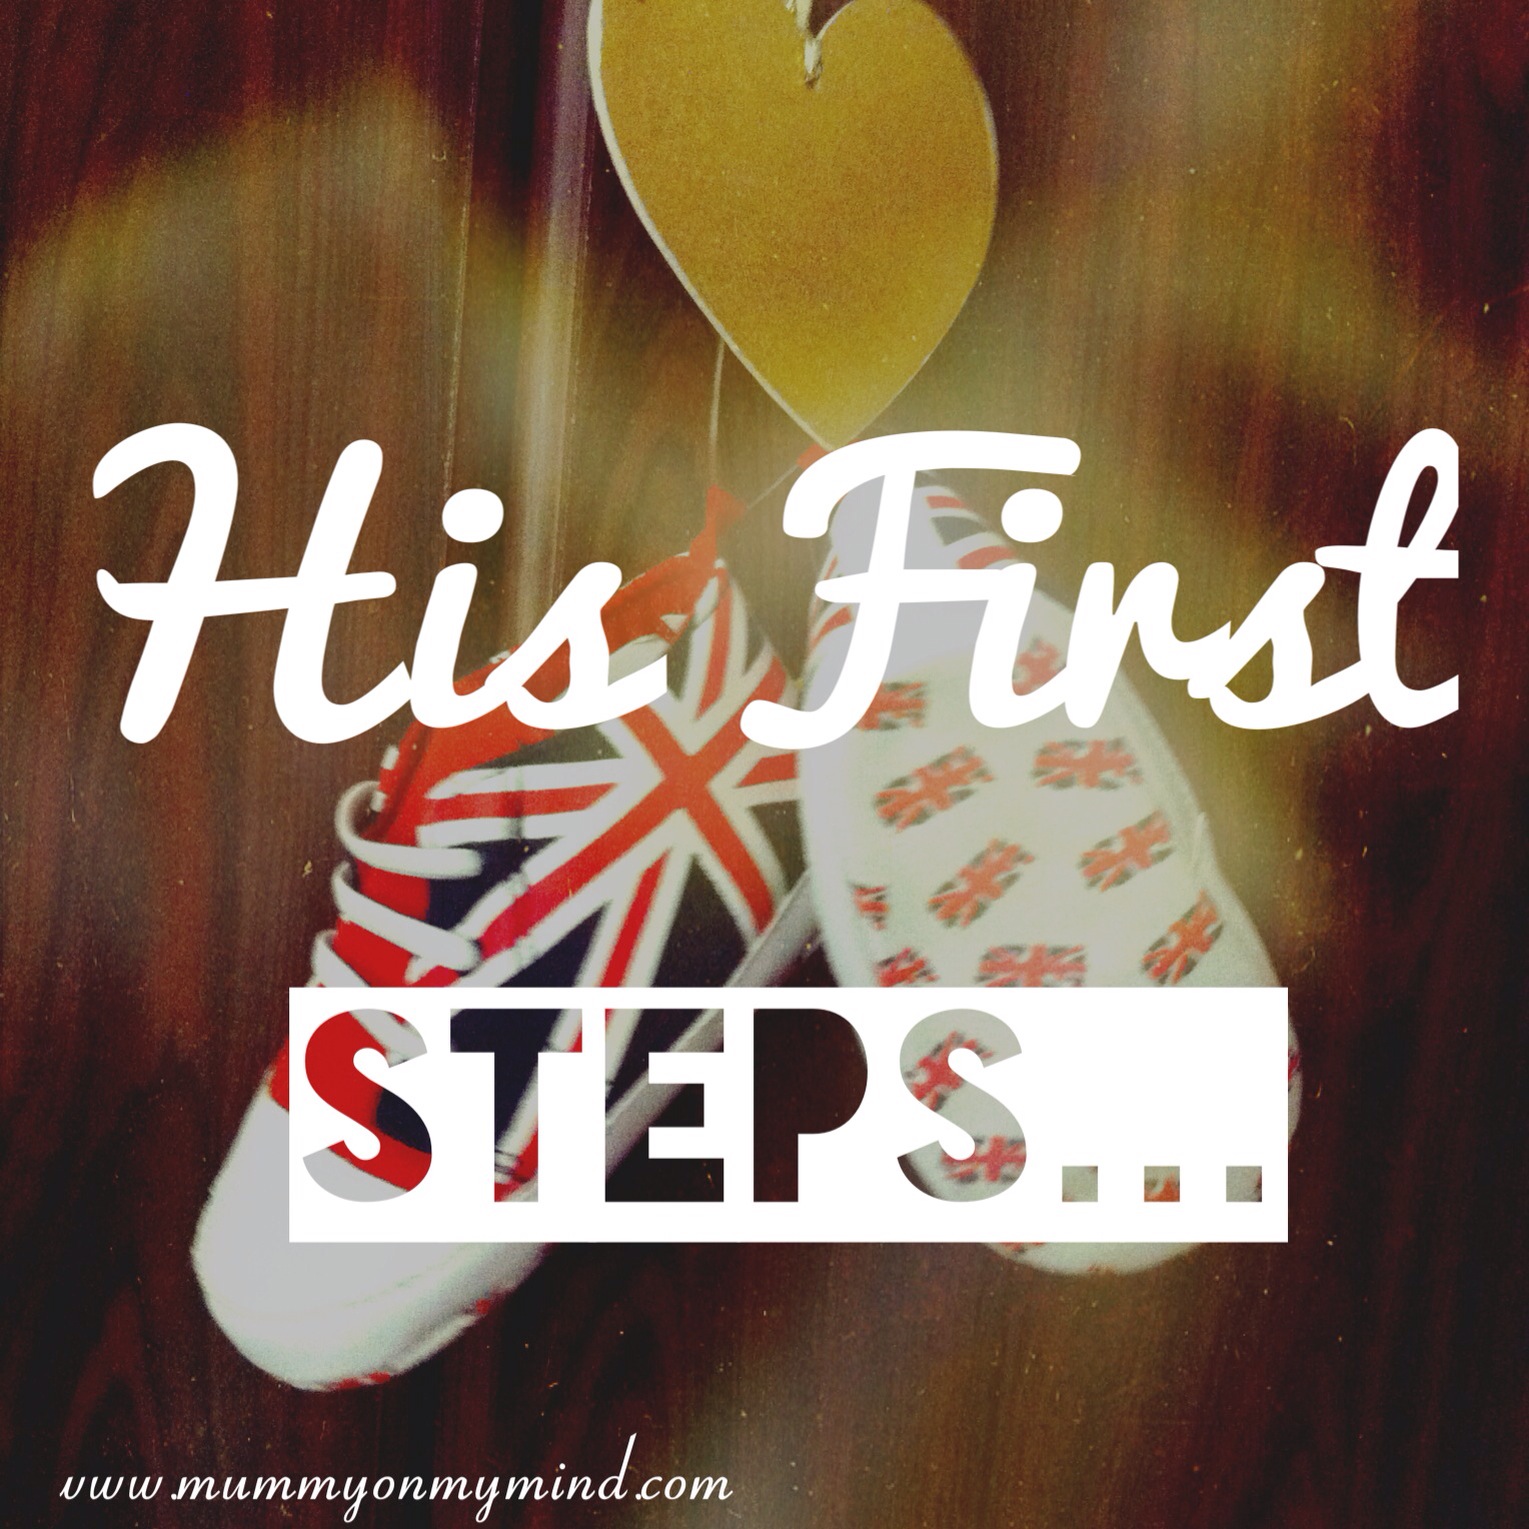 His first steps…